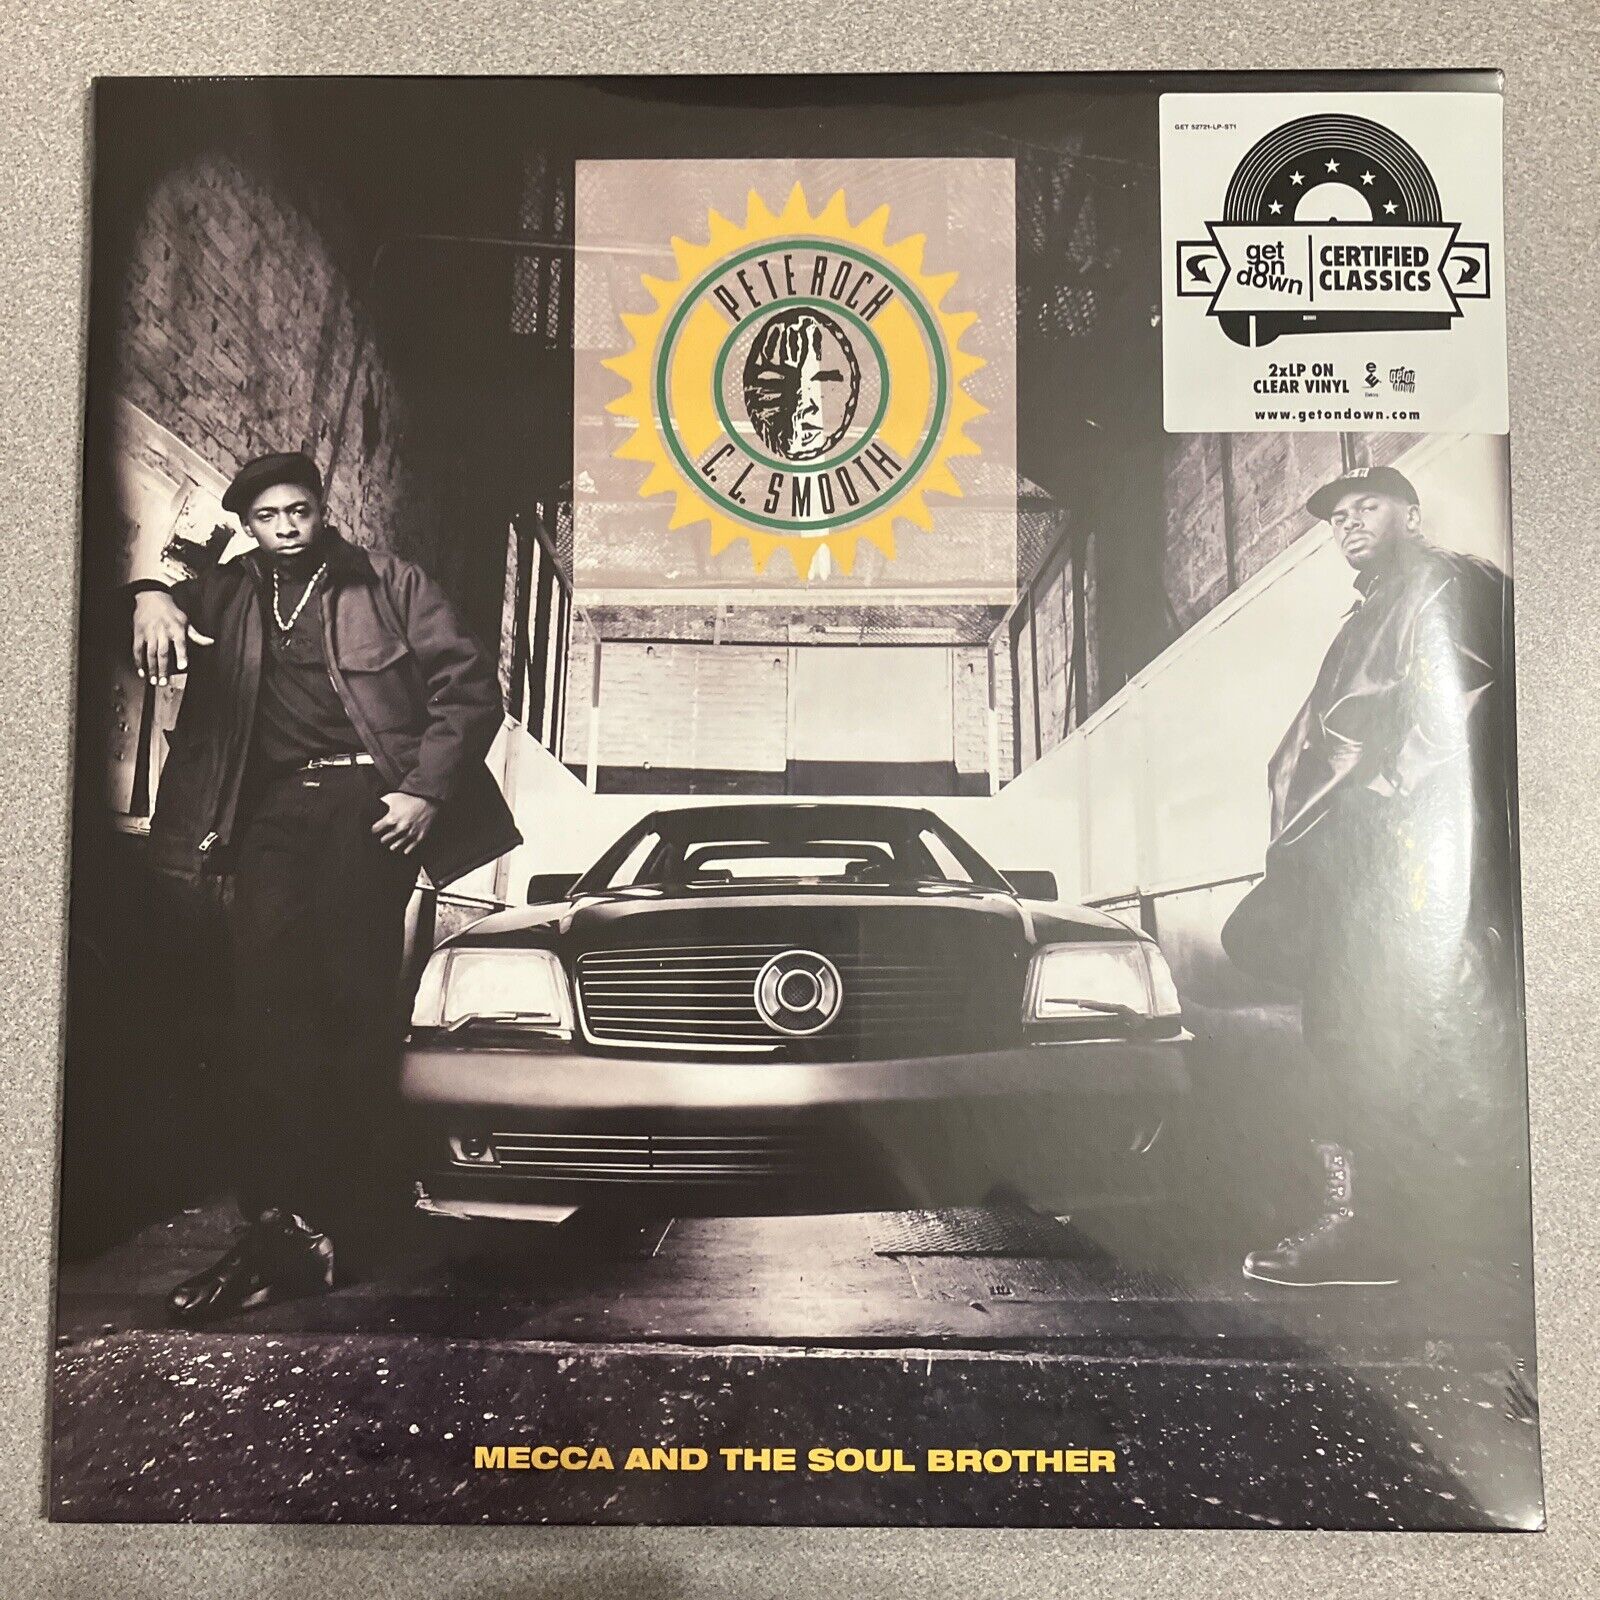 Pete Rock & CL Smooth - Mecca And The Soul Brother -  2XLP On Clear Vinyl